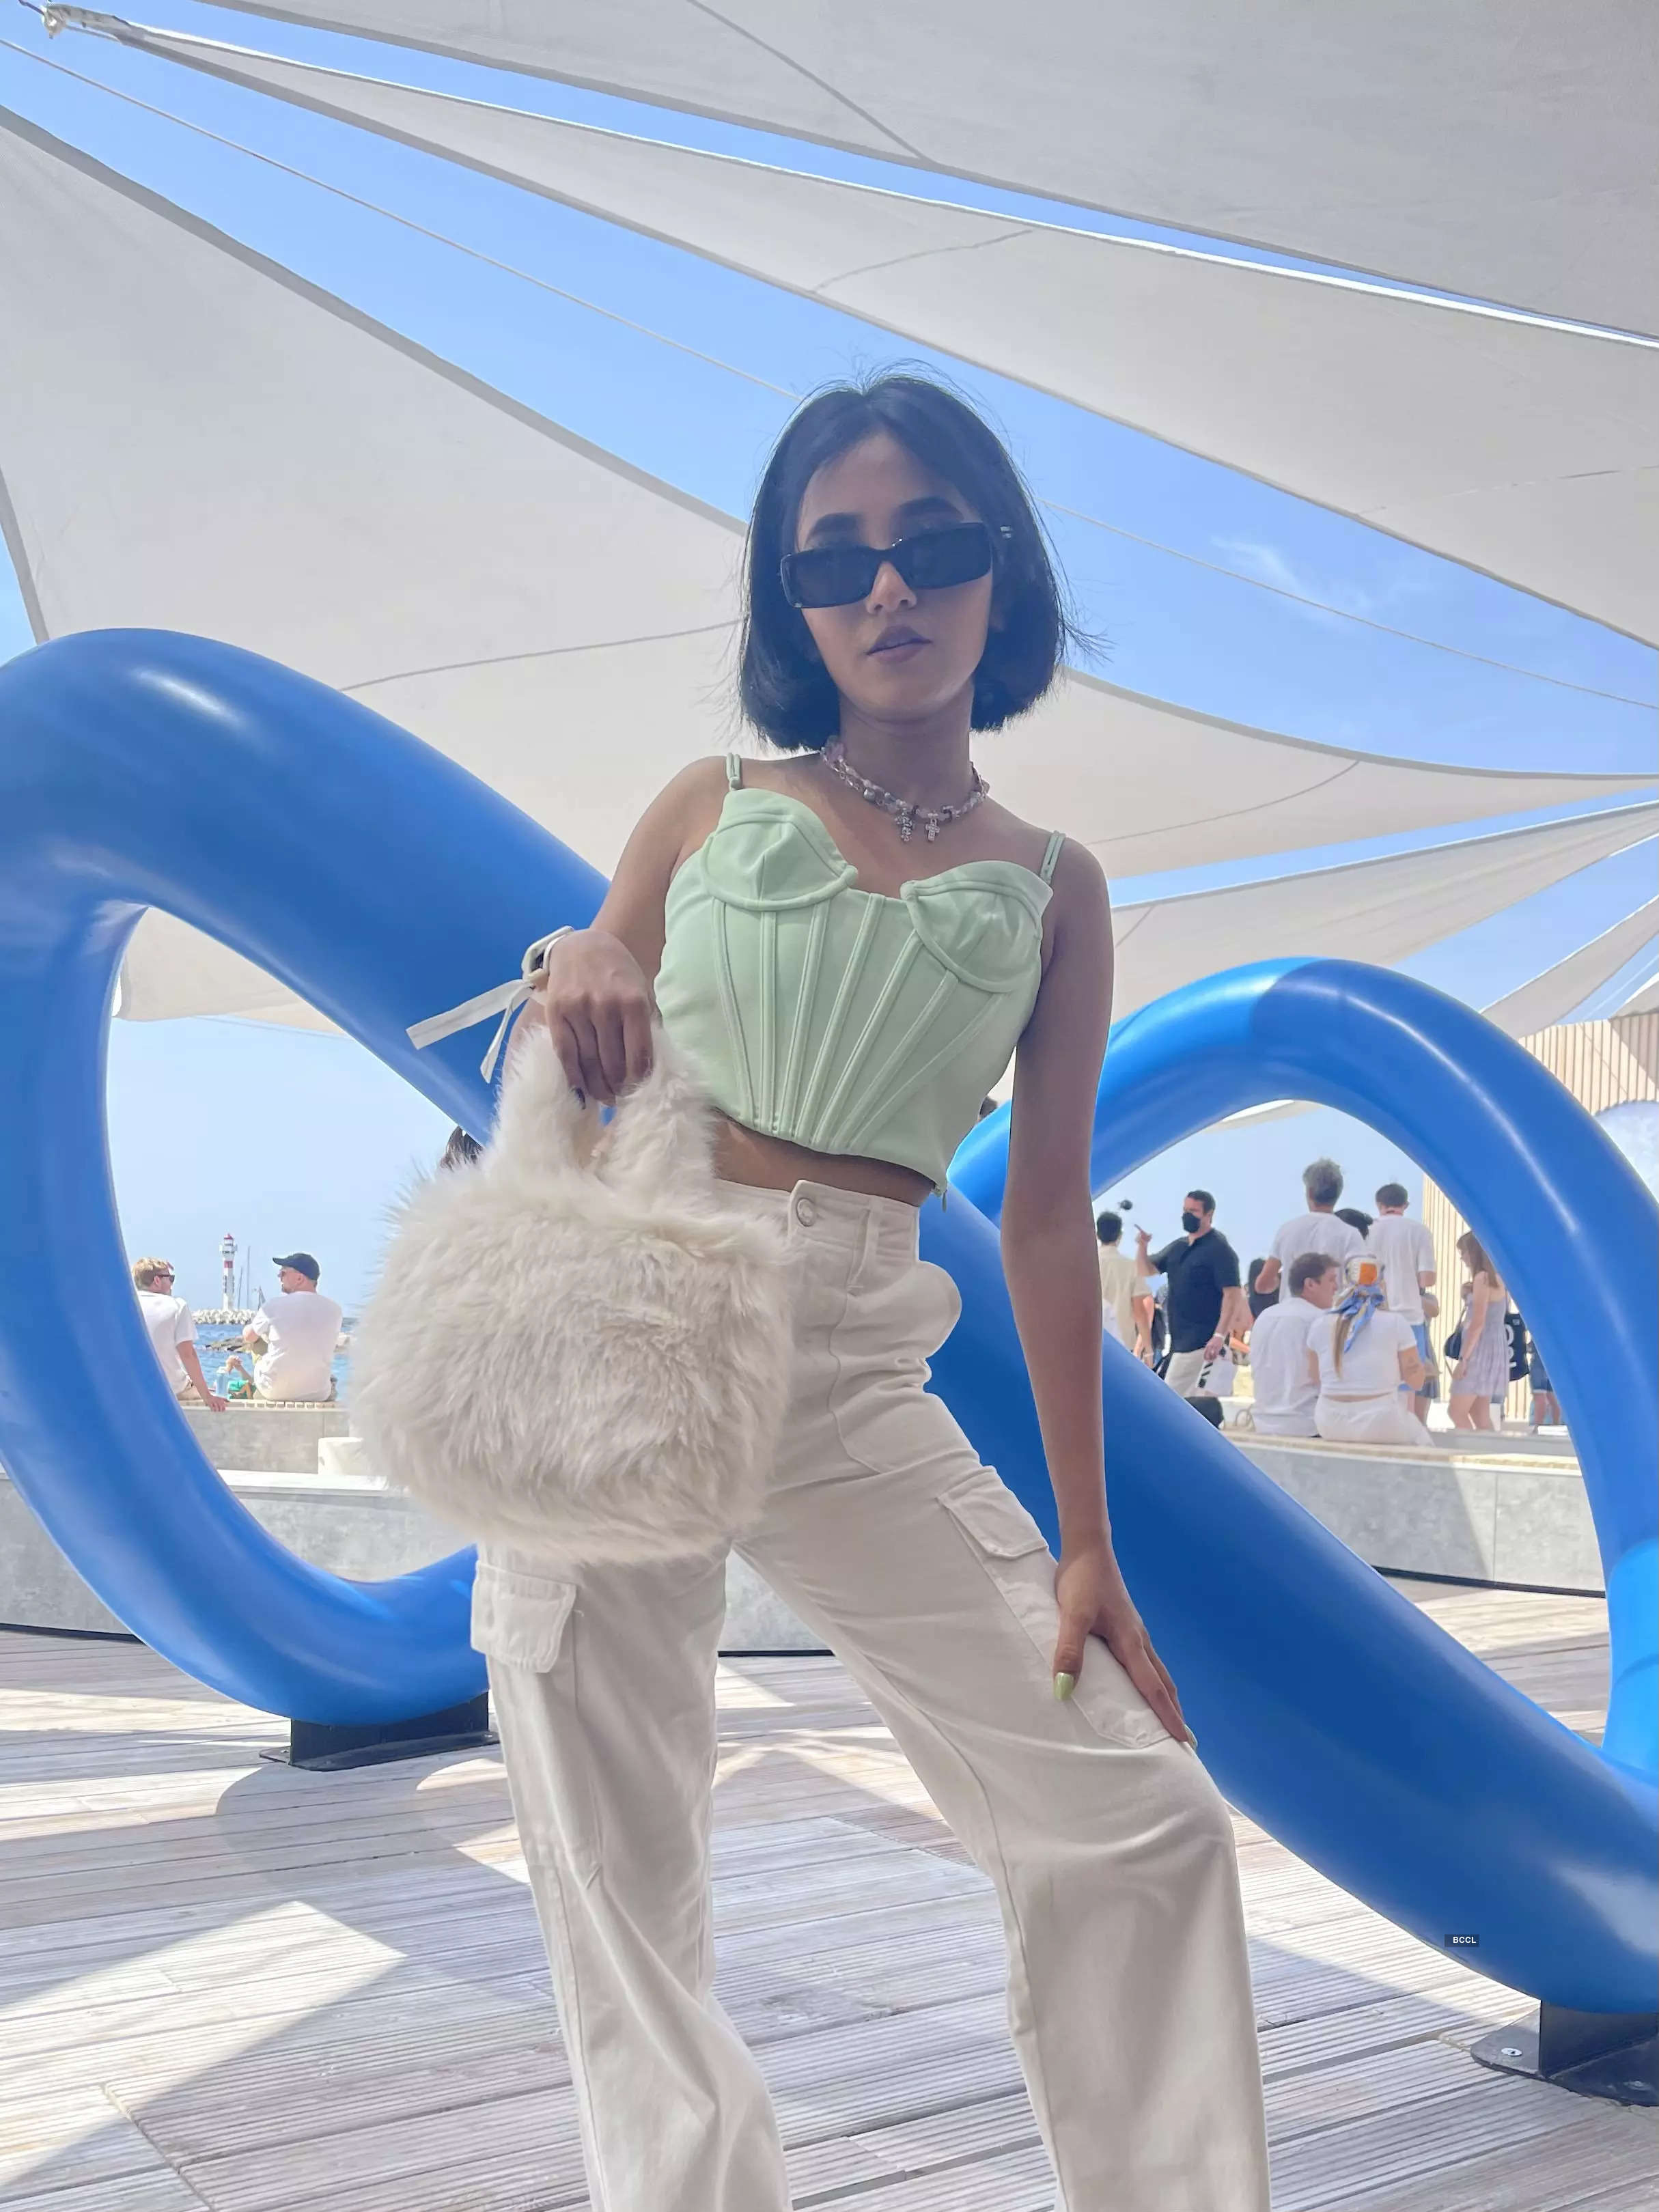 Social media sensation “TheMermaidscales” attends Meta’s immersive learning initiative at Cannes Lions France